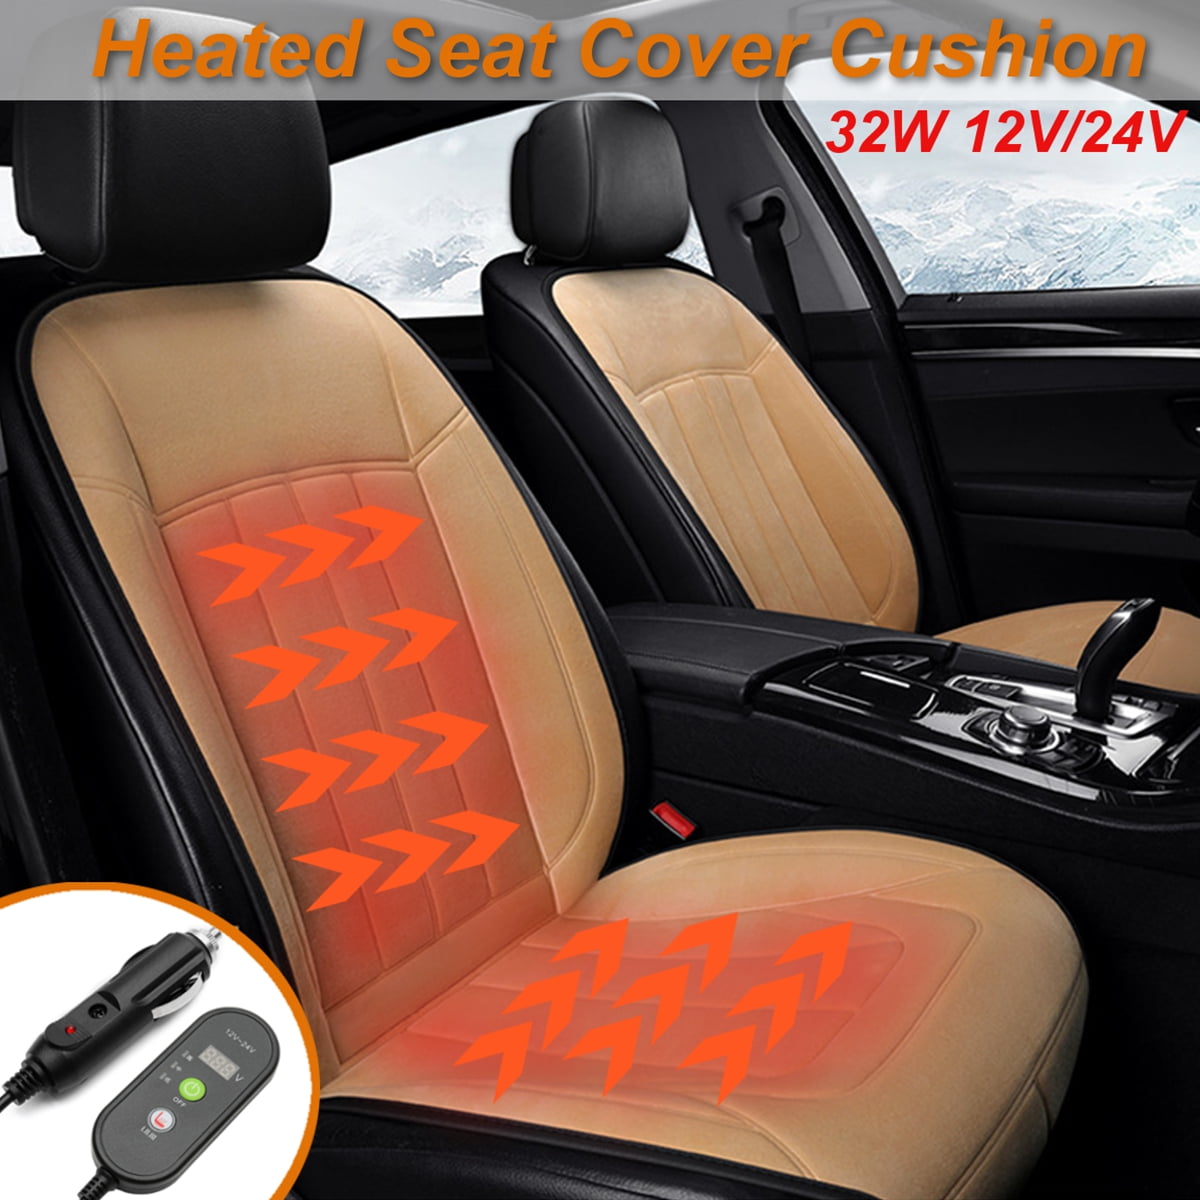 Car Heated Seat Cover Universal 12V/24V Heated Car Seat Cover Pad Chair Cushion Heating Car Seat Warmer with Temperature Controller for Cold Winter,24vblack 